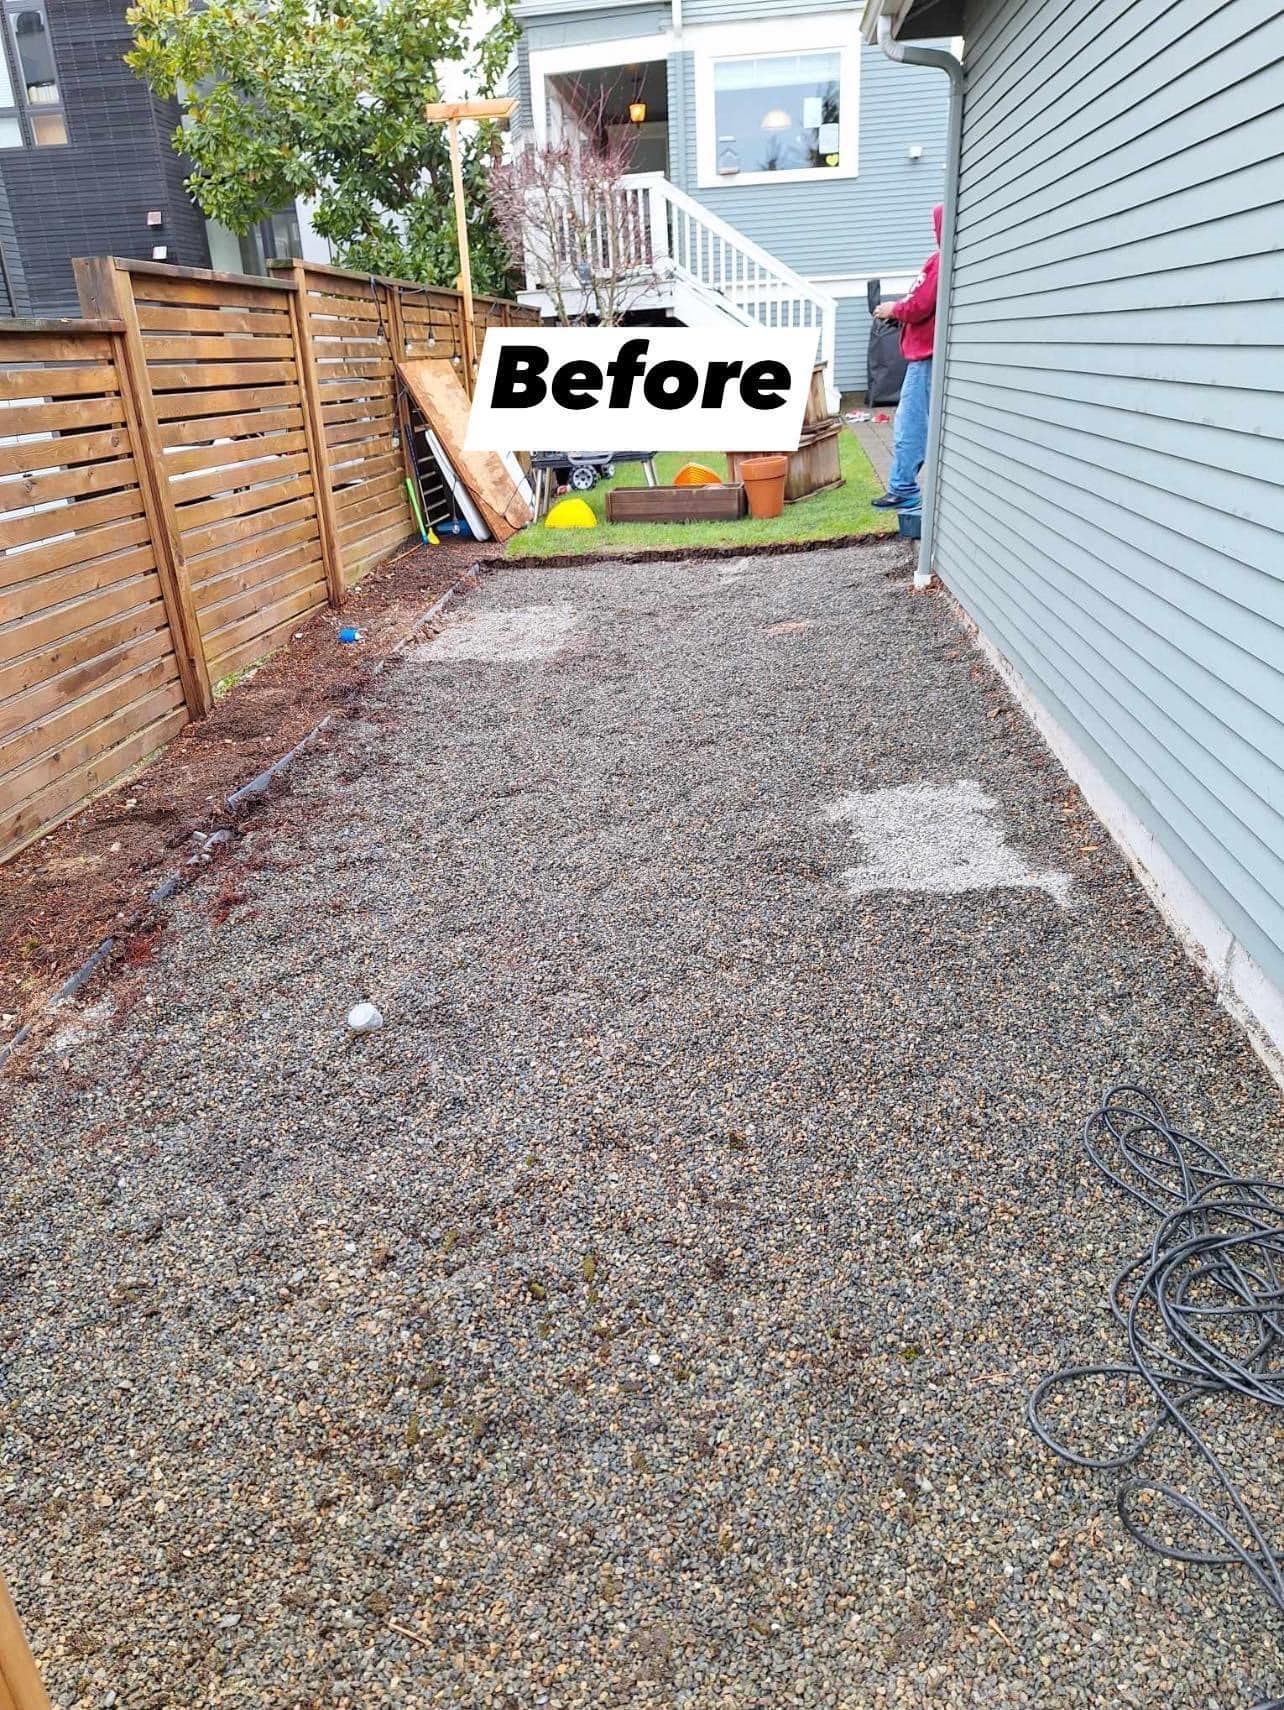 SEATTLE CONCRETE PAD PROJECT - Before